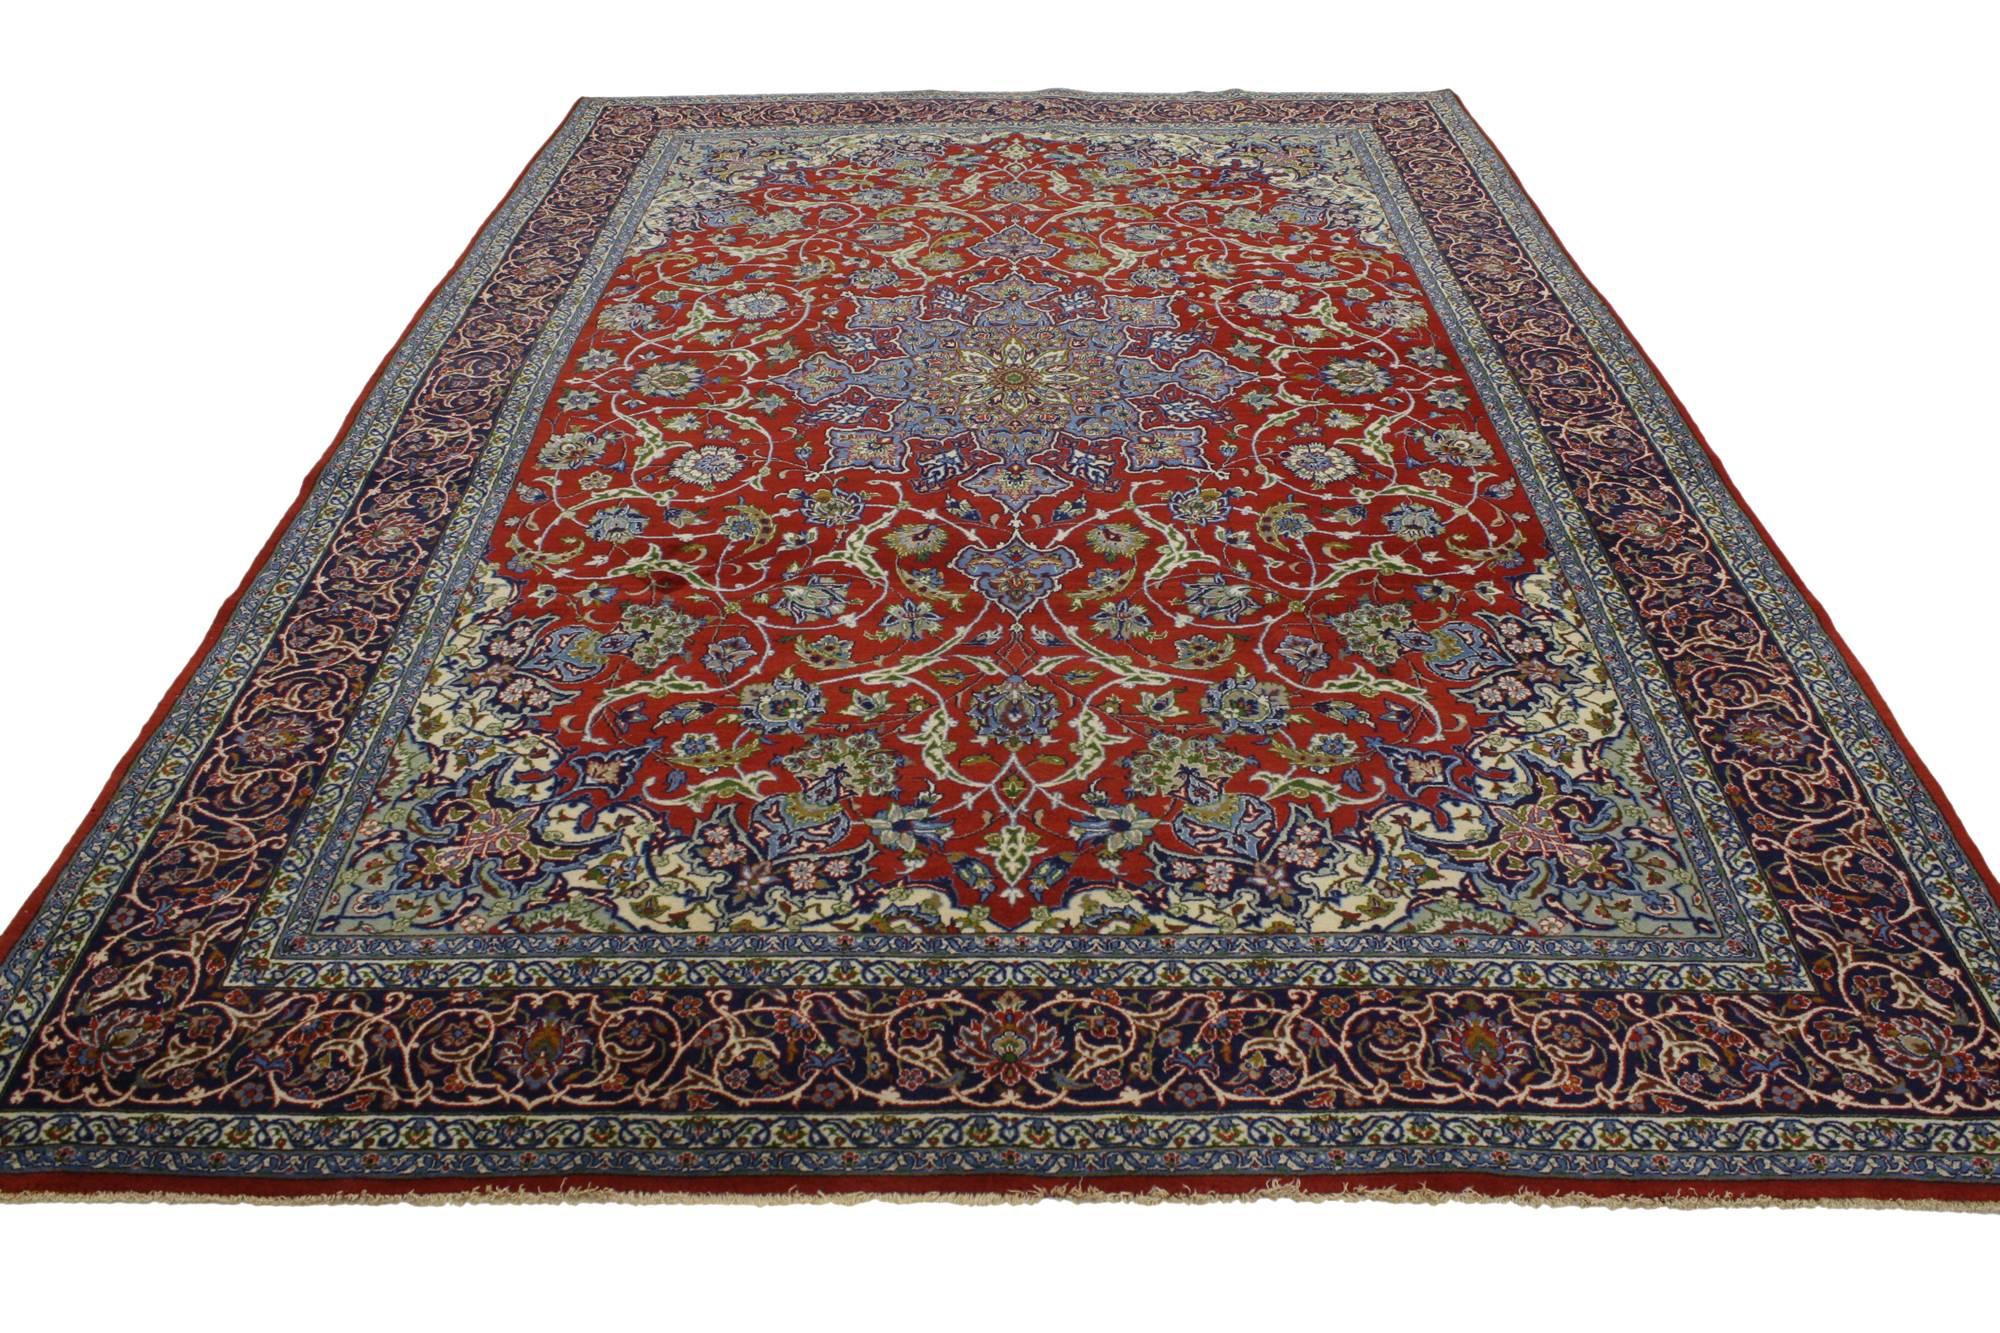 76901 Vintage Persian Isfahan Rug with Shah Abba Design and Federal Style. Rich colors with beguiling ambiance, this hand-knotted wool vintage Persian Isfahan rug features an all-over Shah Abba pattern of dancing vines and tendrils with cornflower